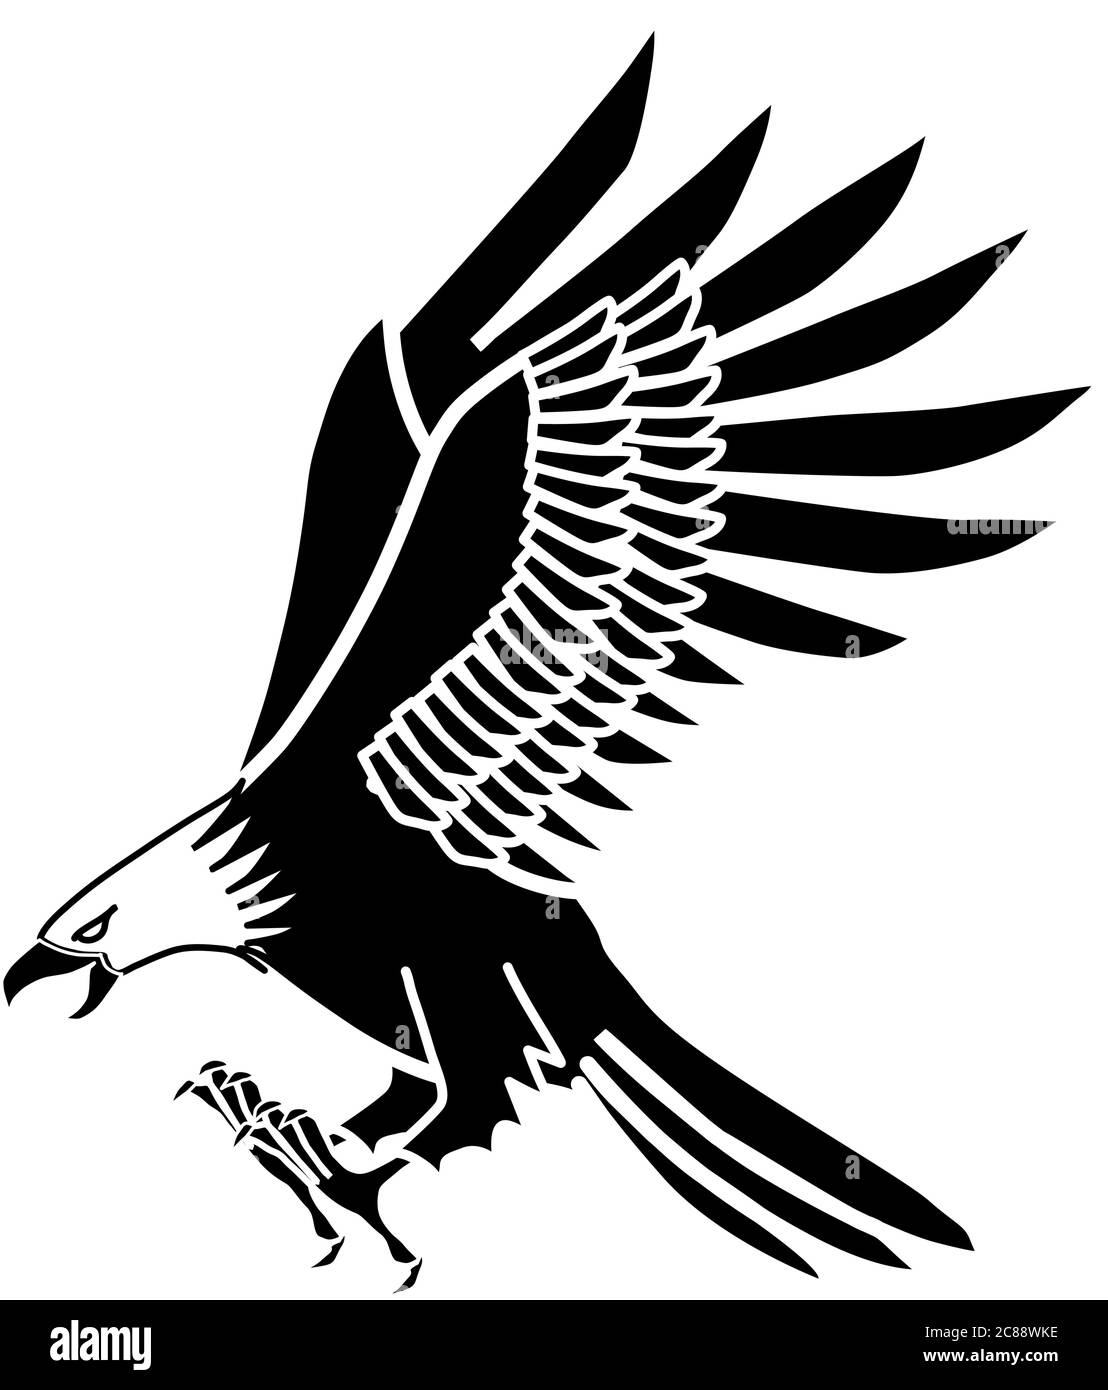 The image of an eagle, white and black, can be used to make logos.The image of an eagle, white and black, can be used to make logos. Stock Vector